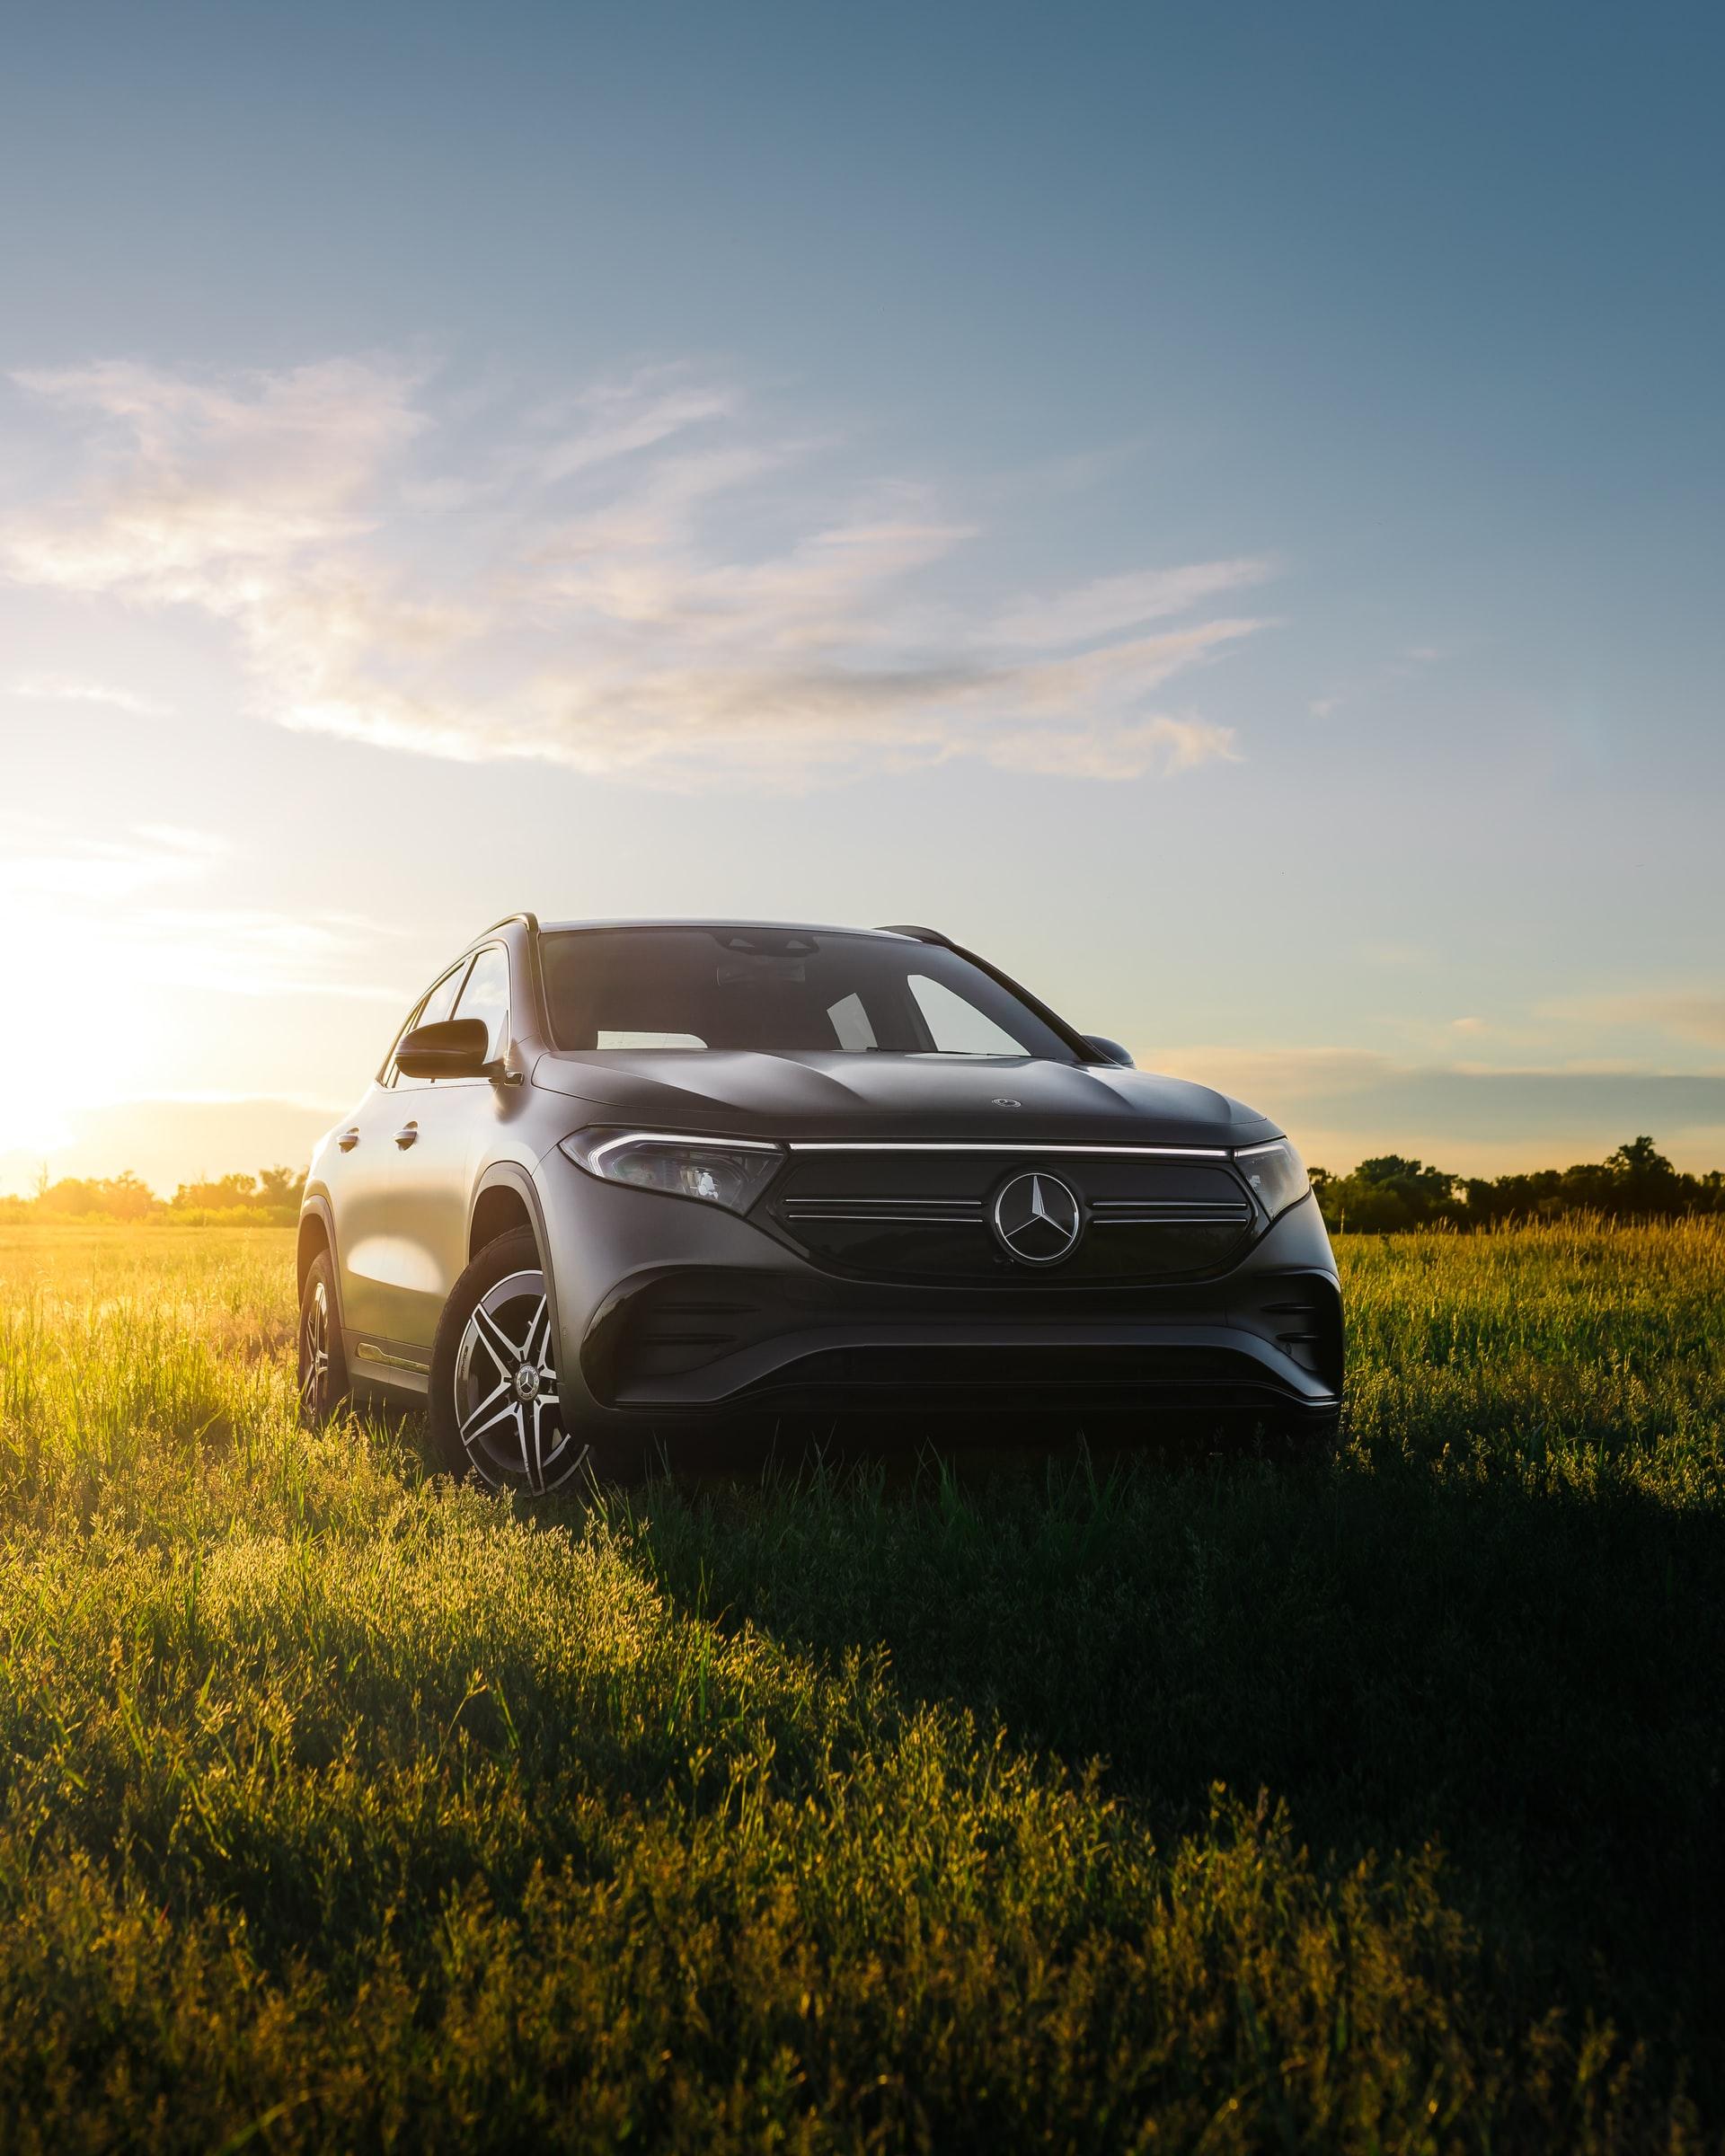 Mercedes-Benz has rolled out their new luxurious electric SUV.